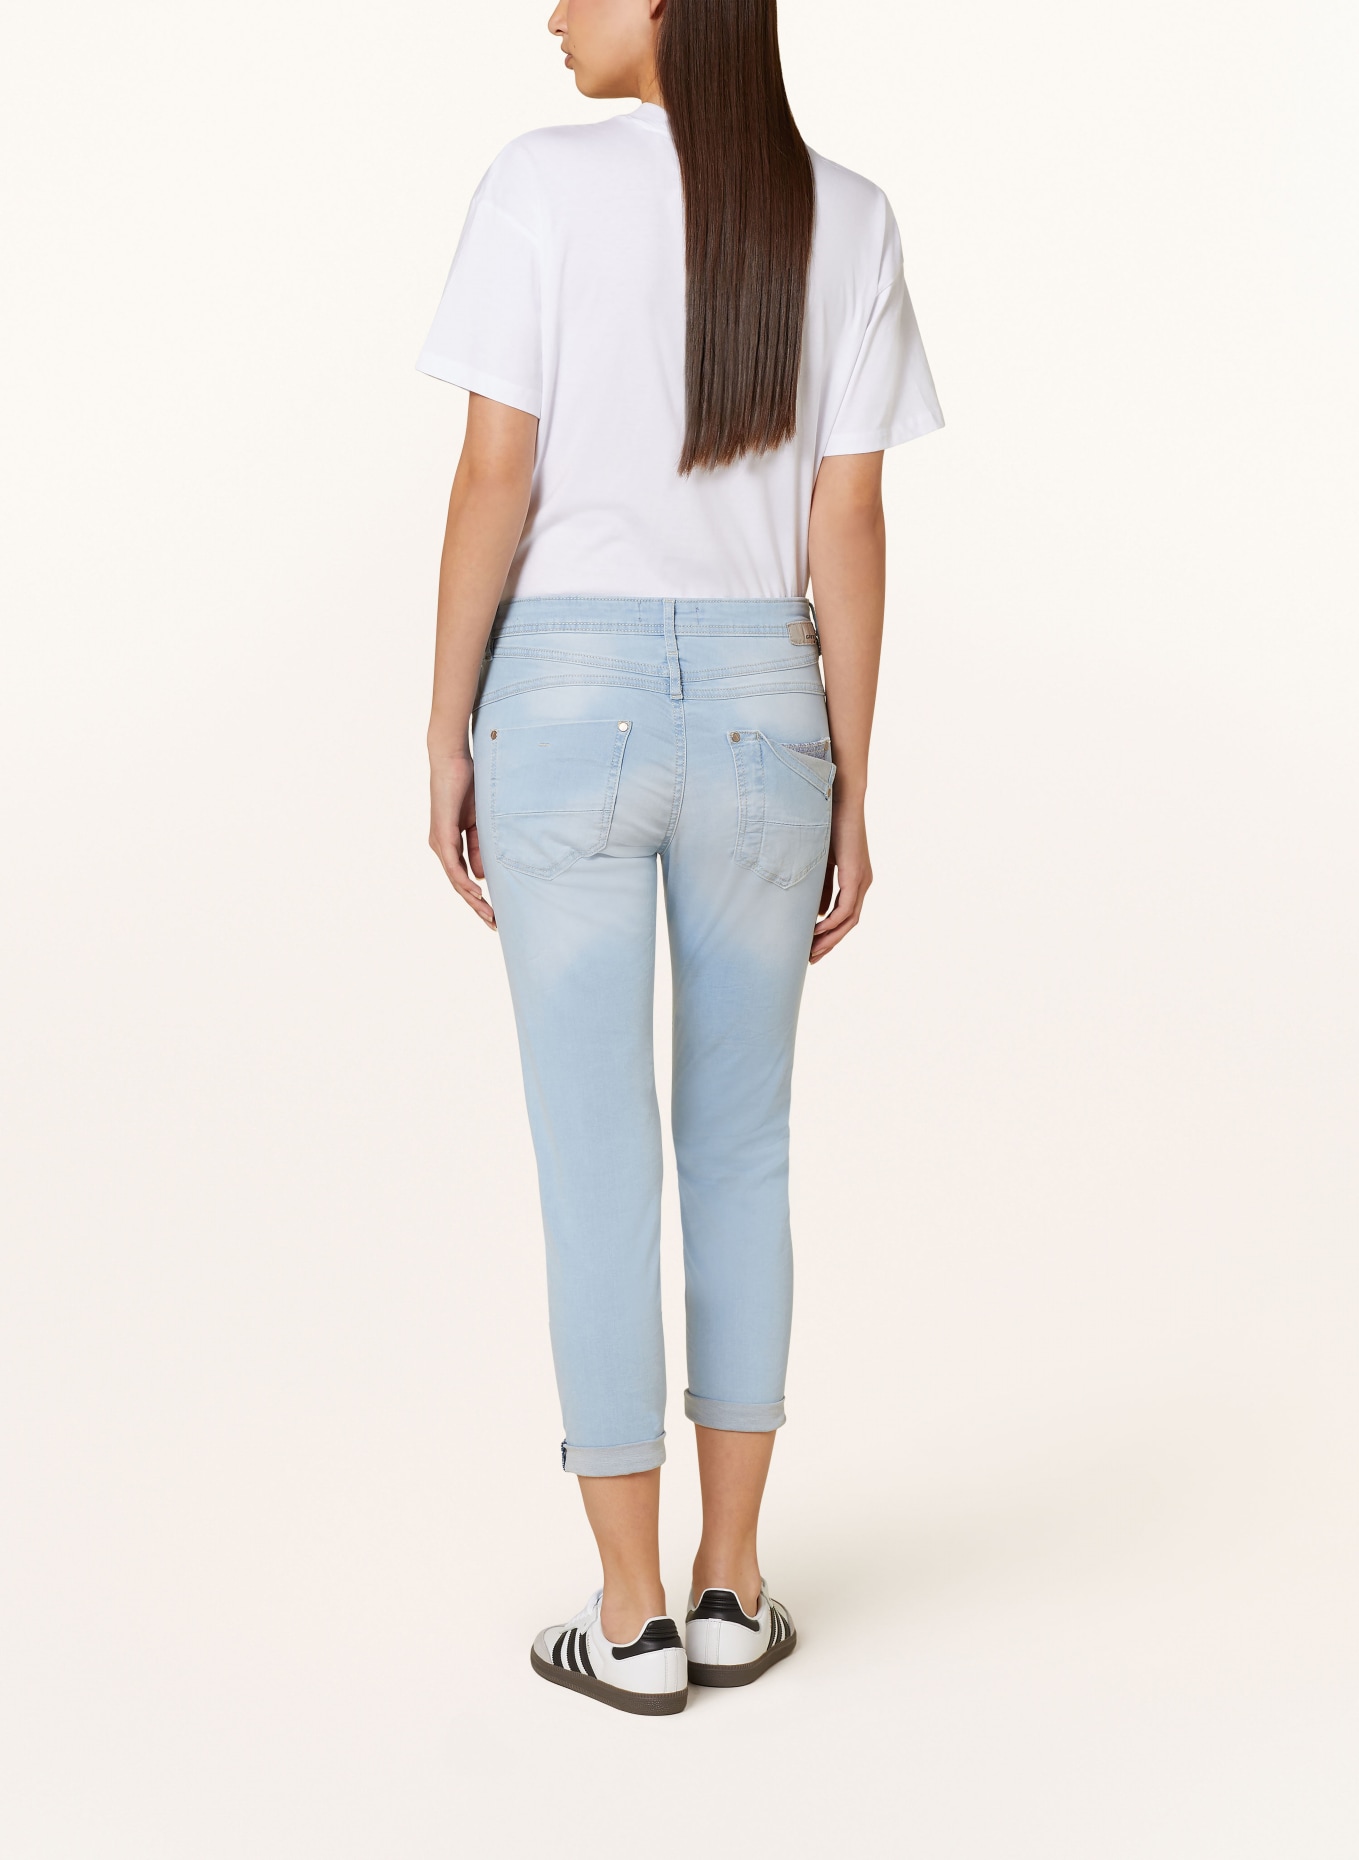 GANG 7/8-Jeans AMELIE, Farbe: 7656 glamour mid (Bild 3)